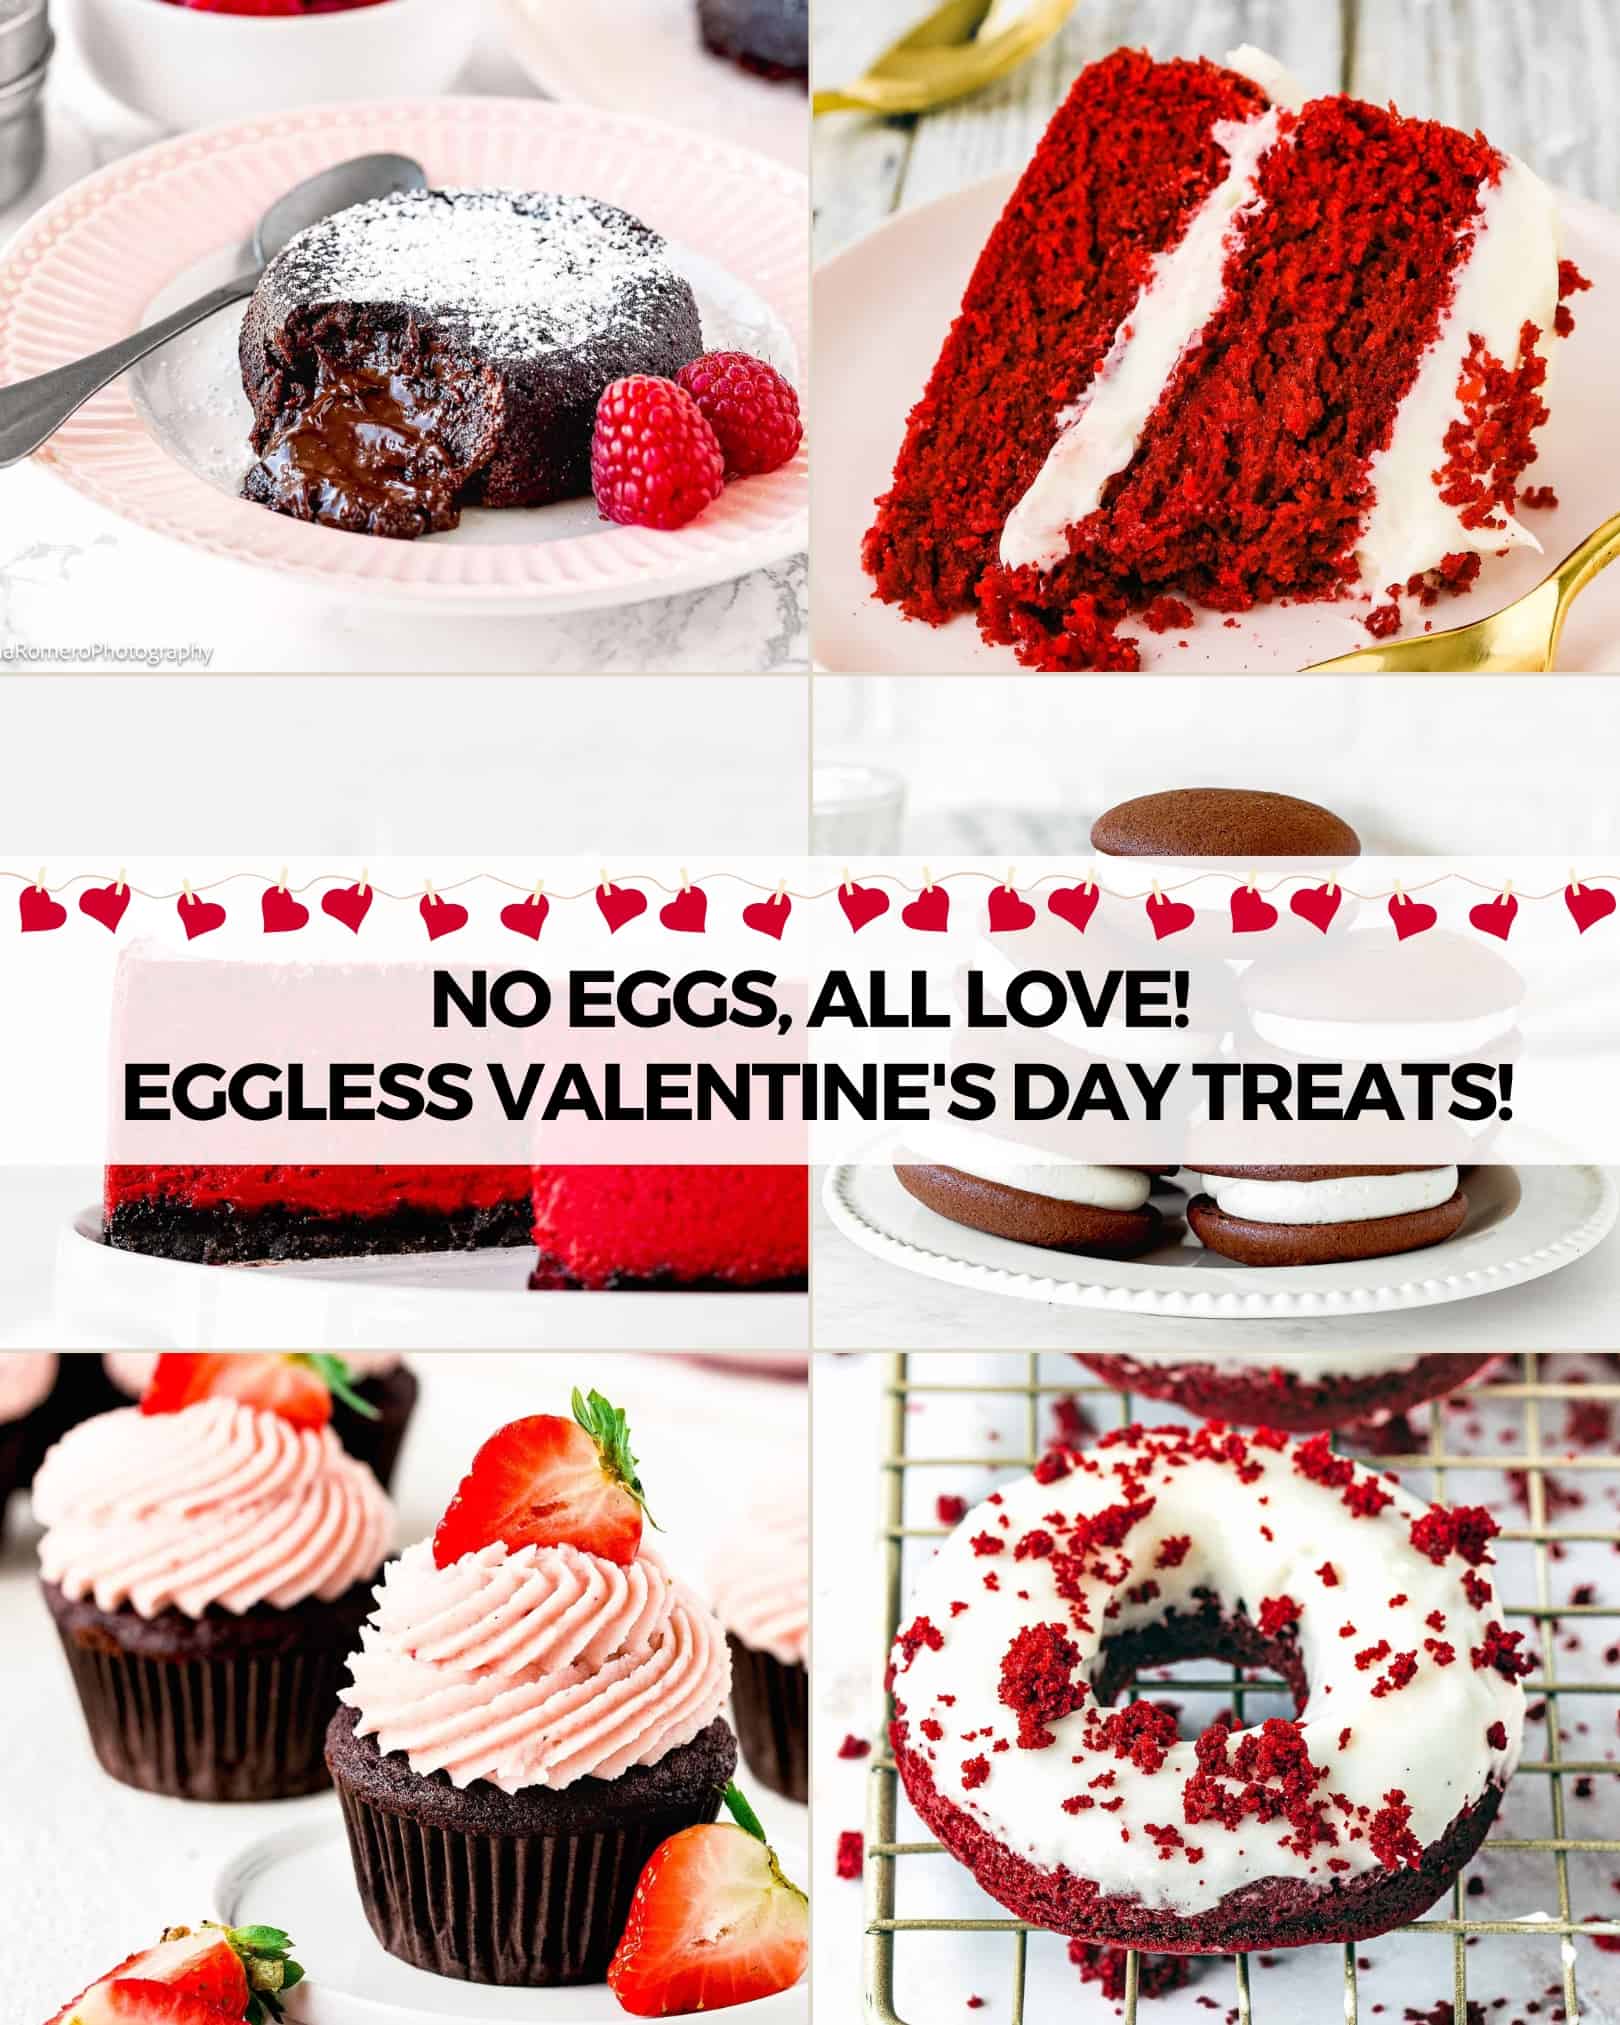 6 photo gallery of Valentines Day treats without eggs.